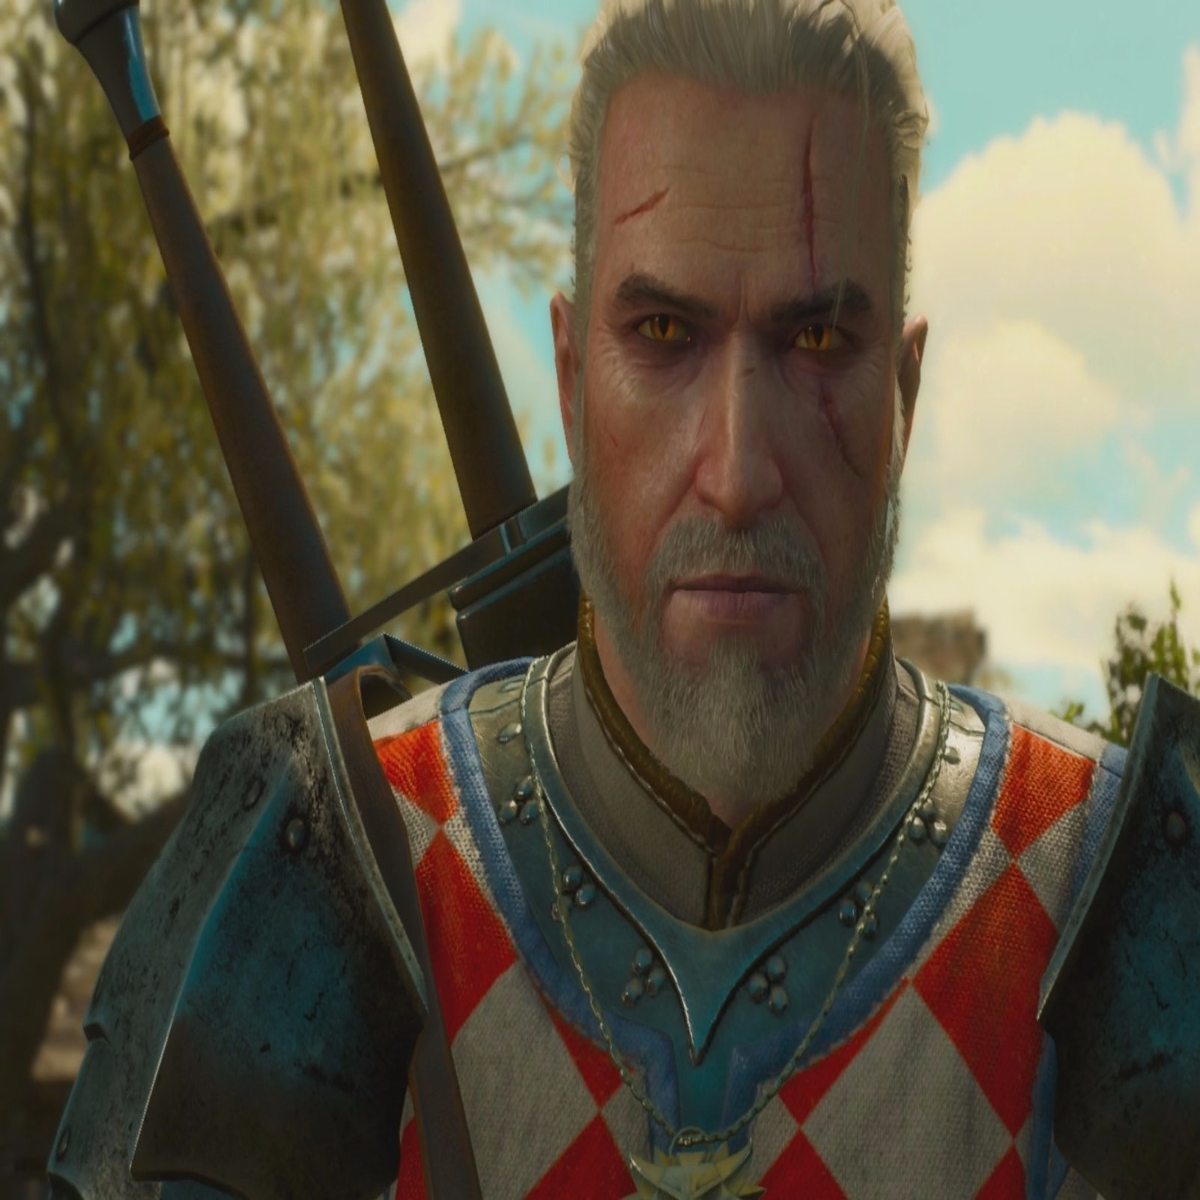 The Witcher 3: The Wild Hunt – Blood and Wine (PS4) Review